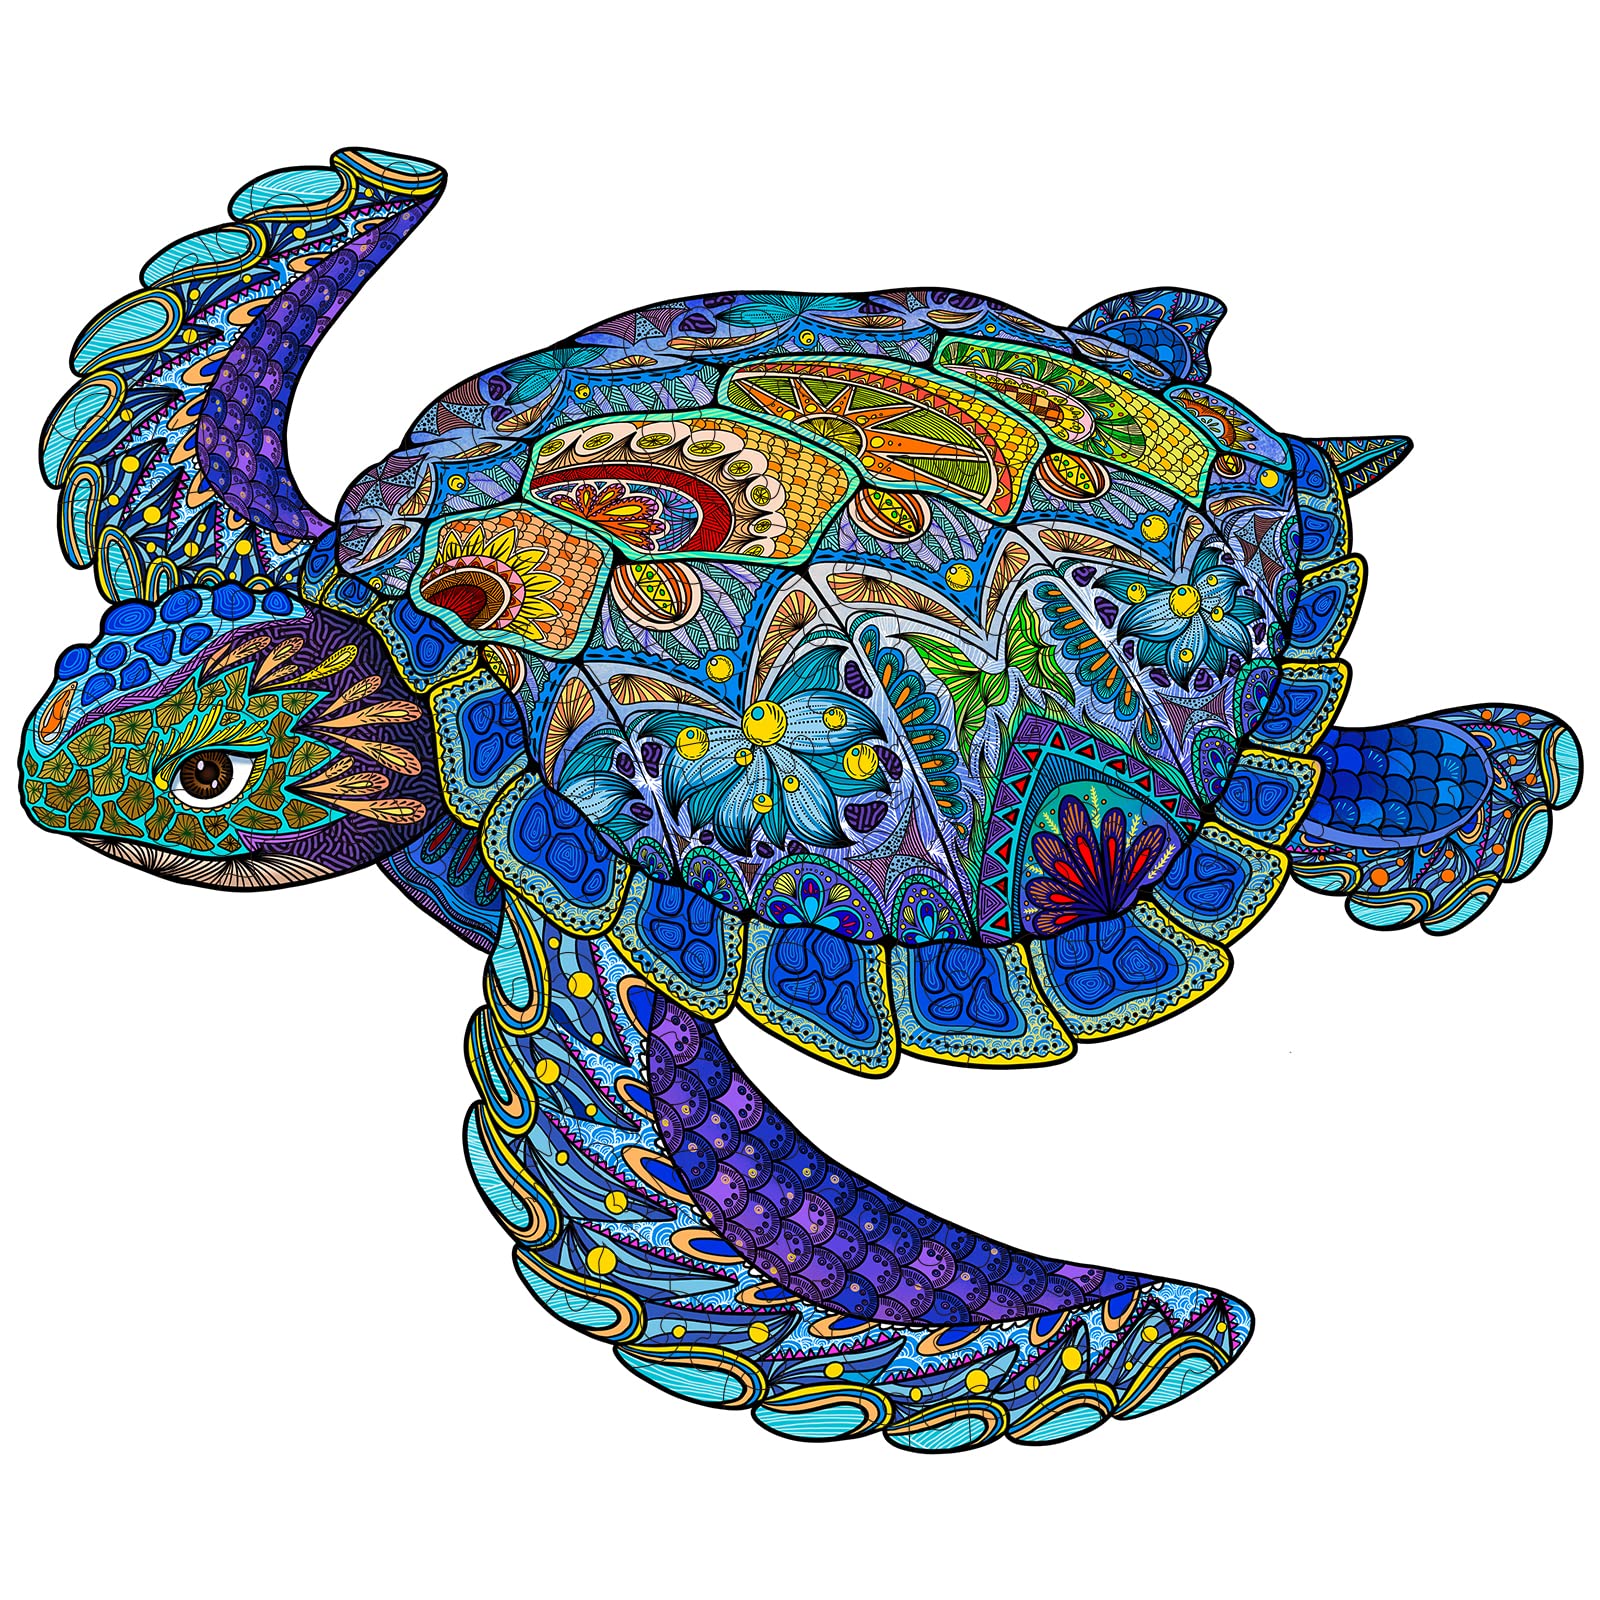 Wooden puzzle for adults aagood sea turtle wooden puzzles jigsaw unique animal shaped pieces longevity sea turtle puzzle best gift for adults kids toddlers pcs ã inches medium toys